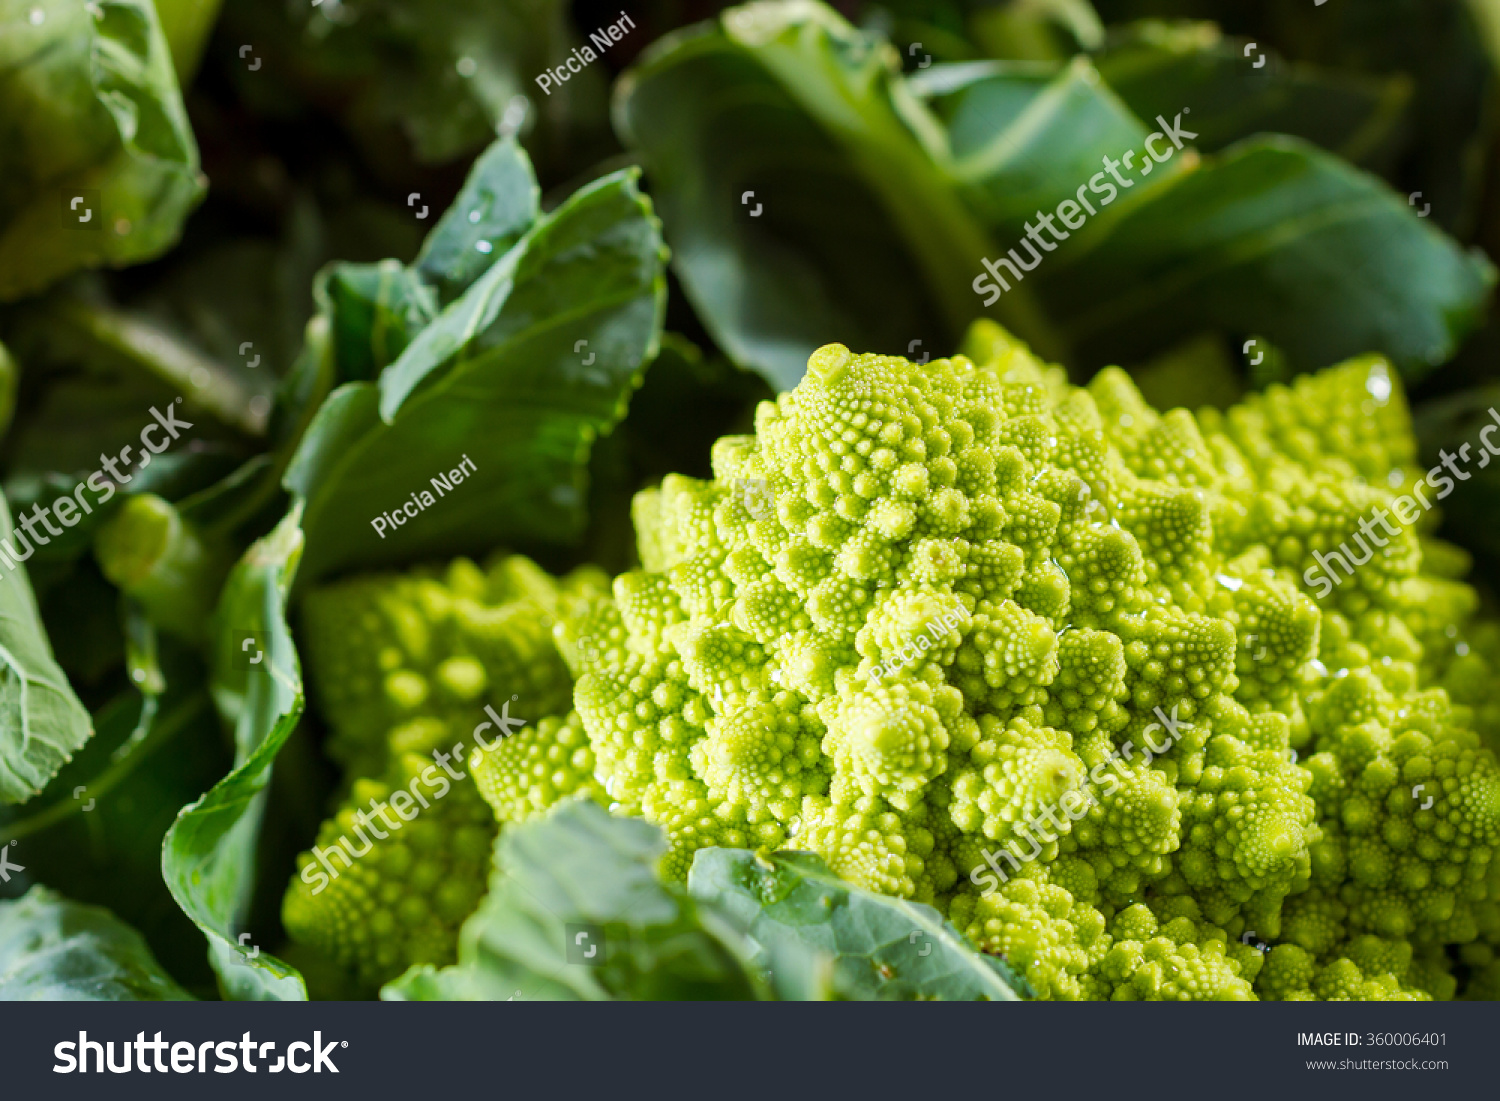 Romanesco cauliflower with its fractal shapes and Fibonacci sequences in focus, with purple broccoli in the foreground and cabbage leaves in the background. #360006401